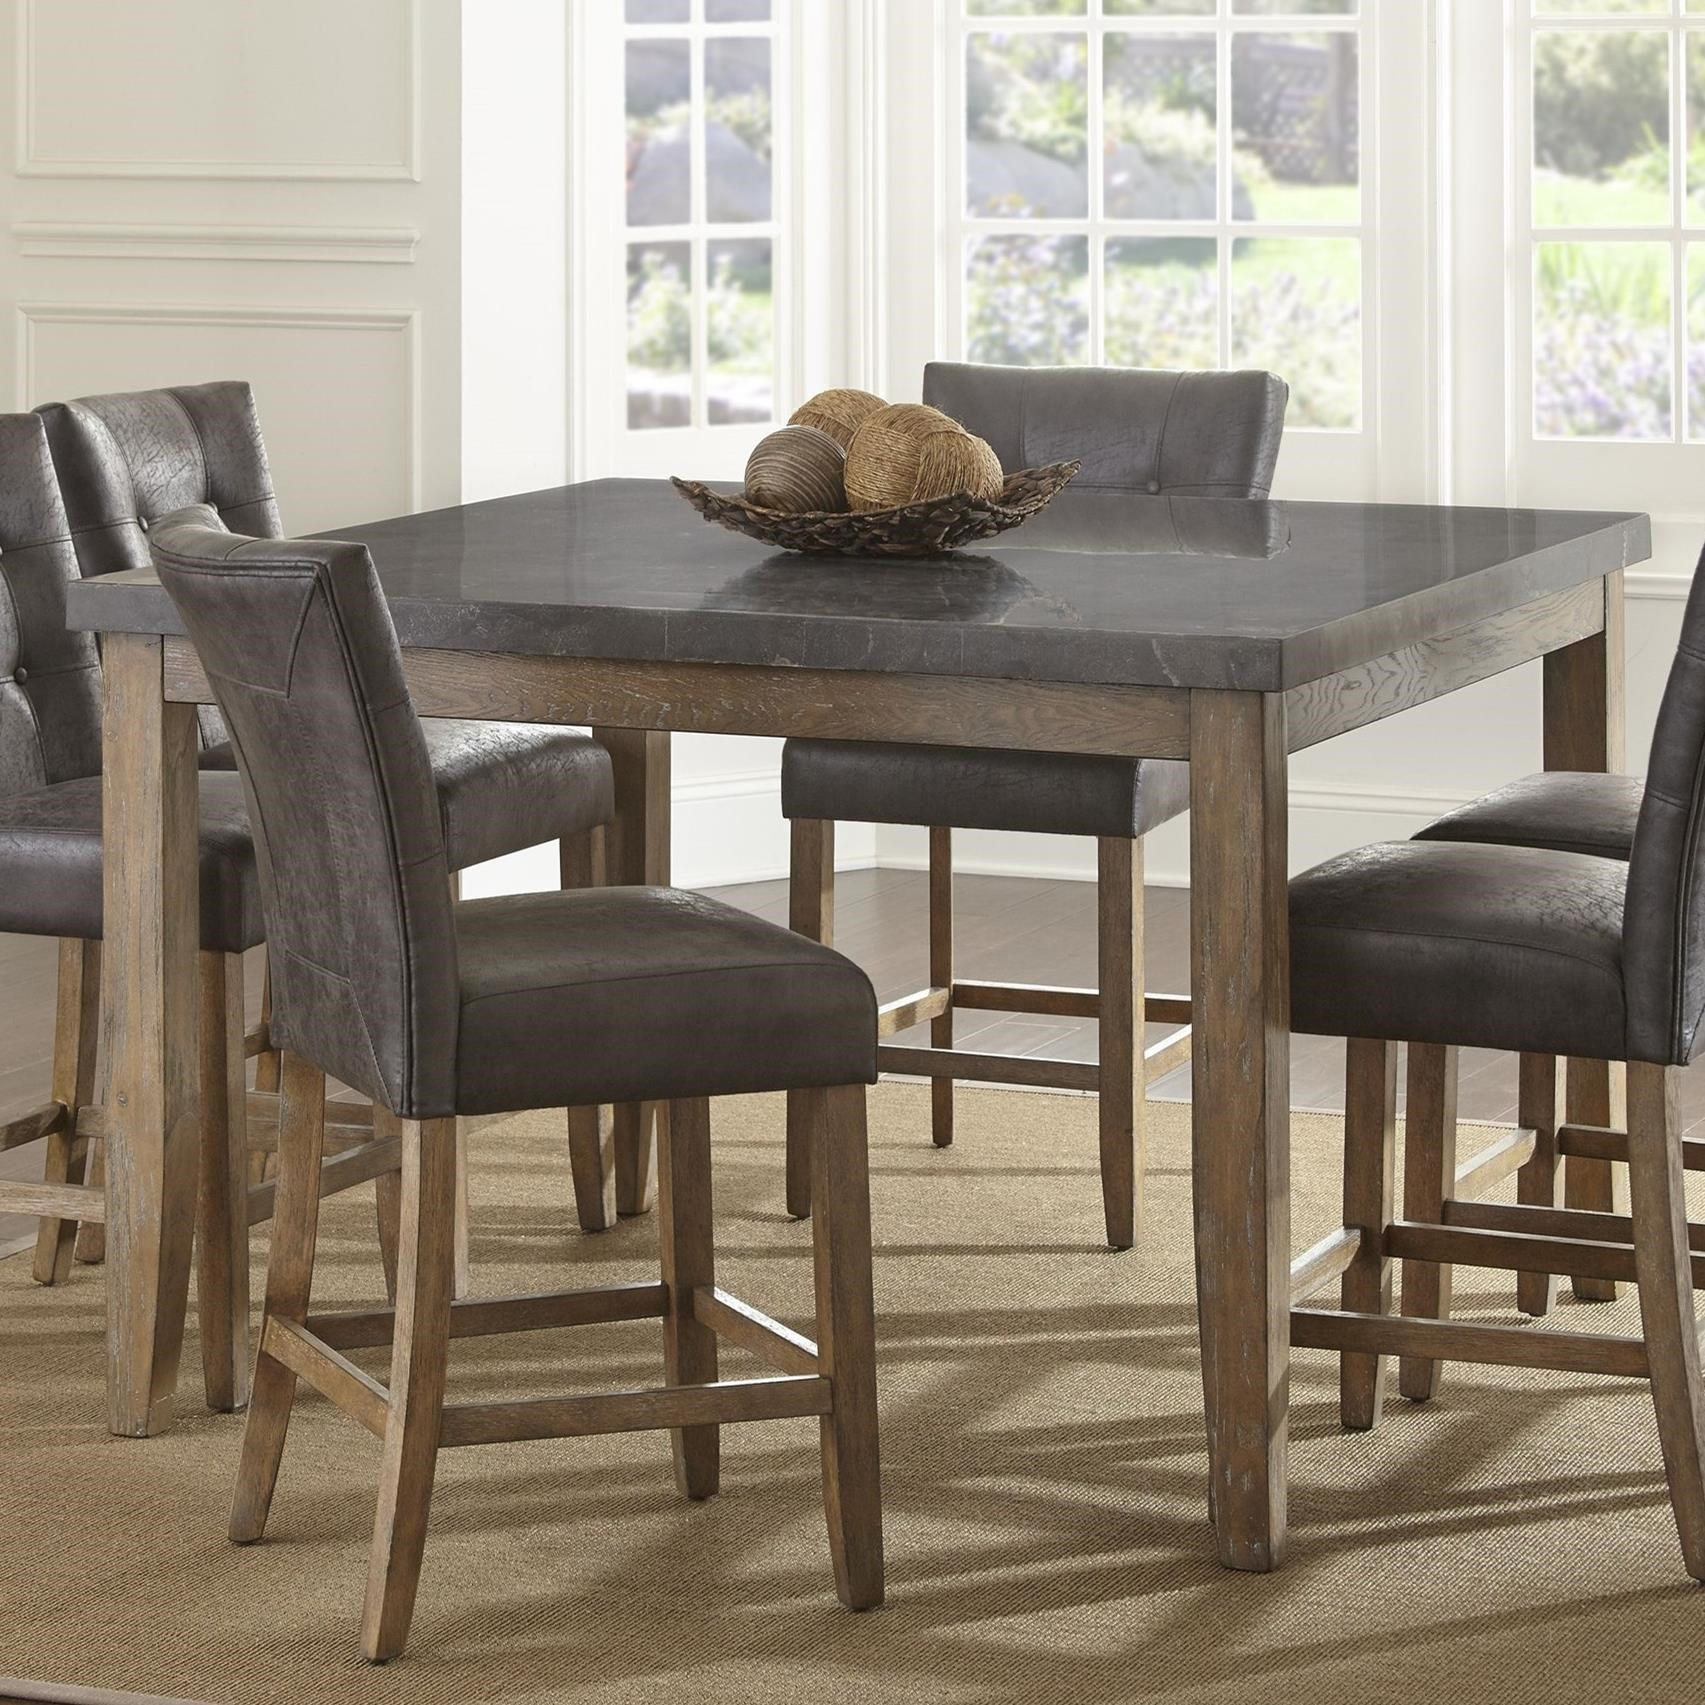 Square Dining Room Table With Chairs Pc Kitchen For in dimensions 1705 X 1705